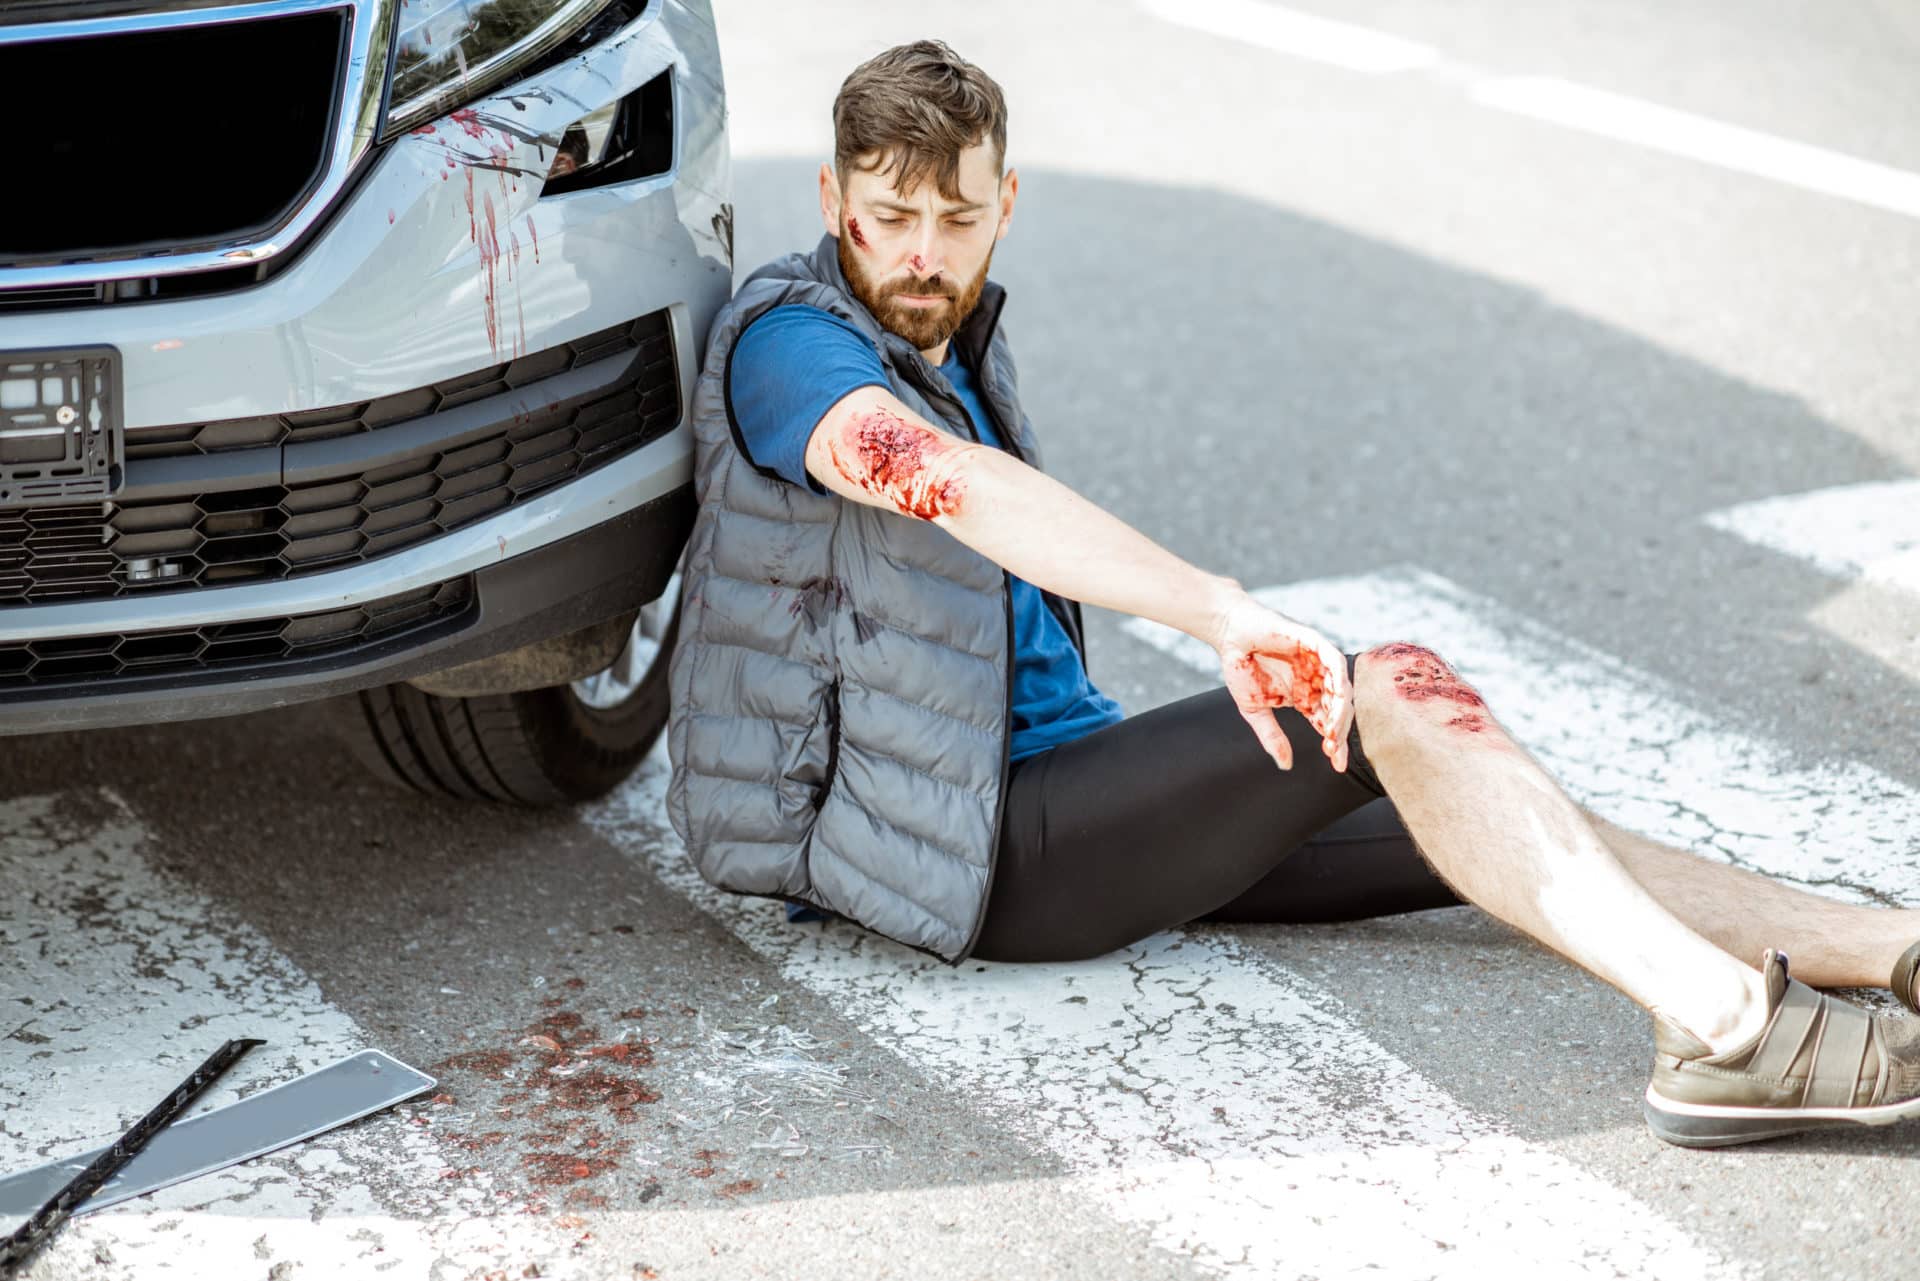 What Happens When the NYC Driver Who Injured Me Dies?